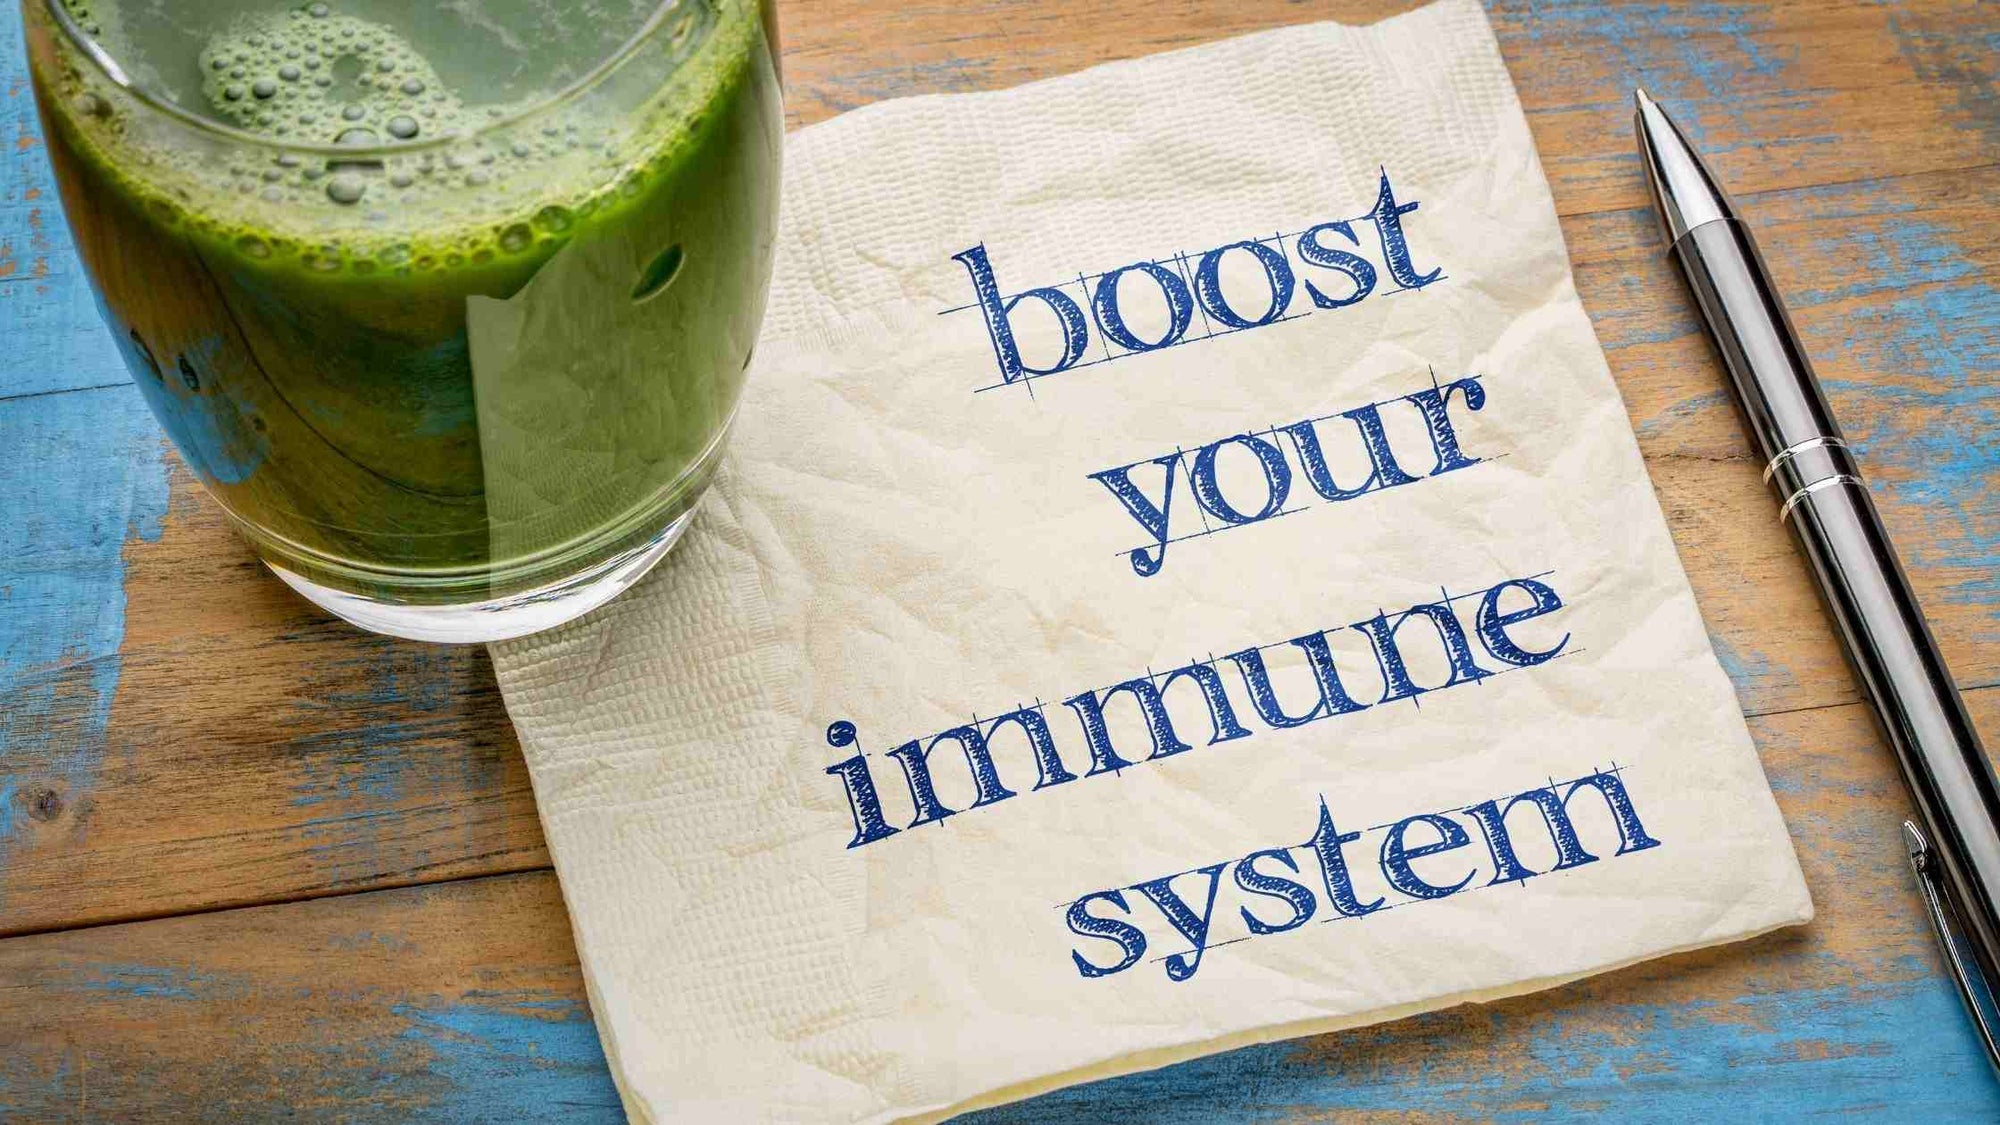 Build up your immune system for winter